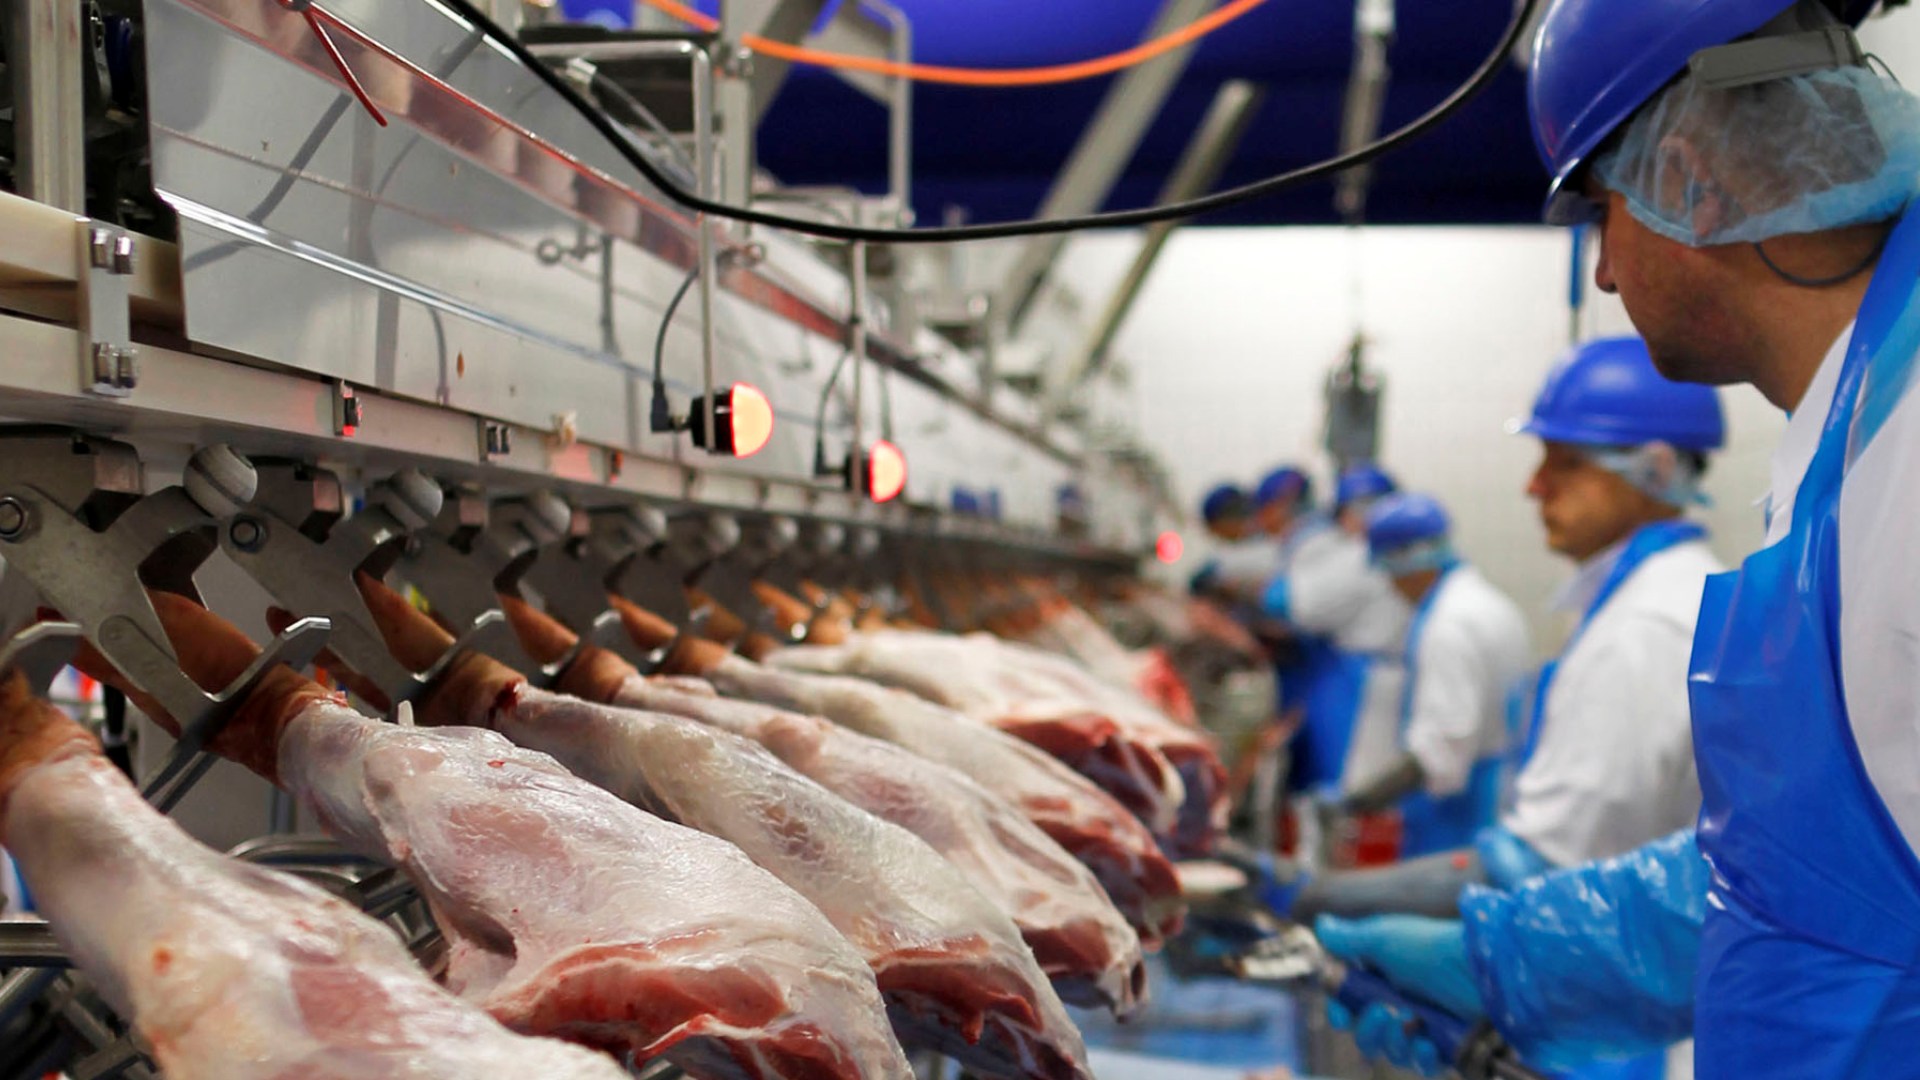 Mitigating COVID-19 Risk Among Workers In Meat And Poultry Processing